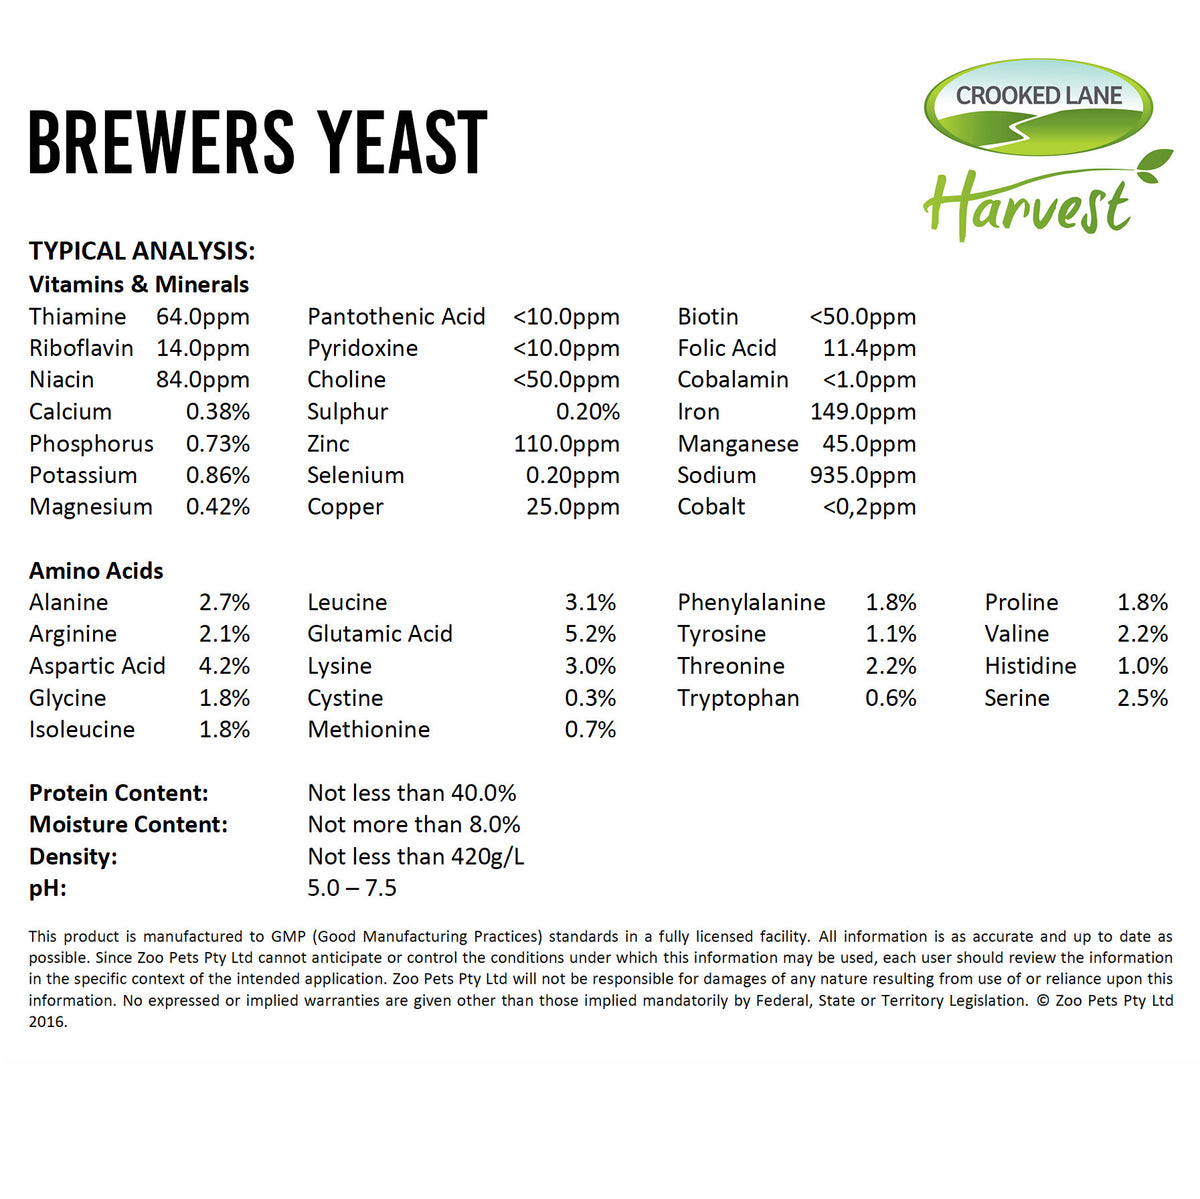 Crooked Lane Harvest Brewers Yeast